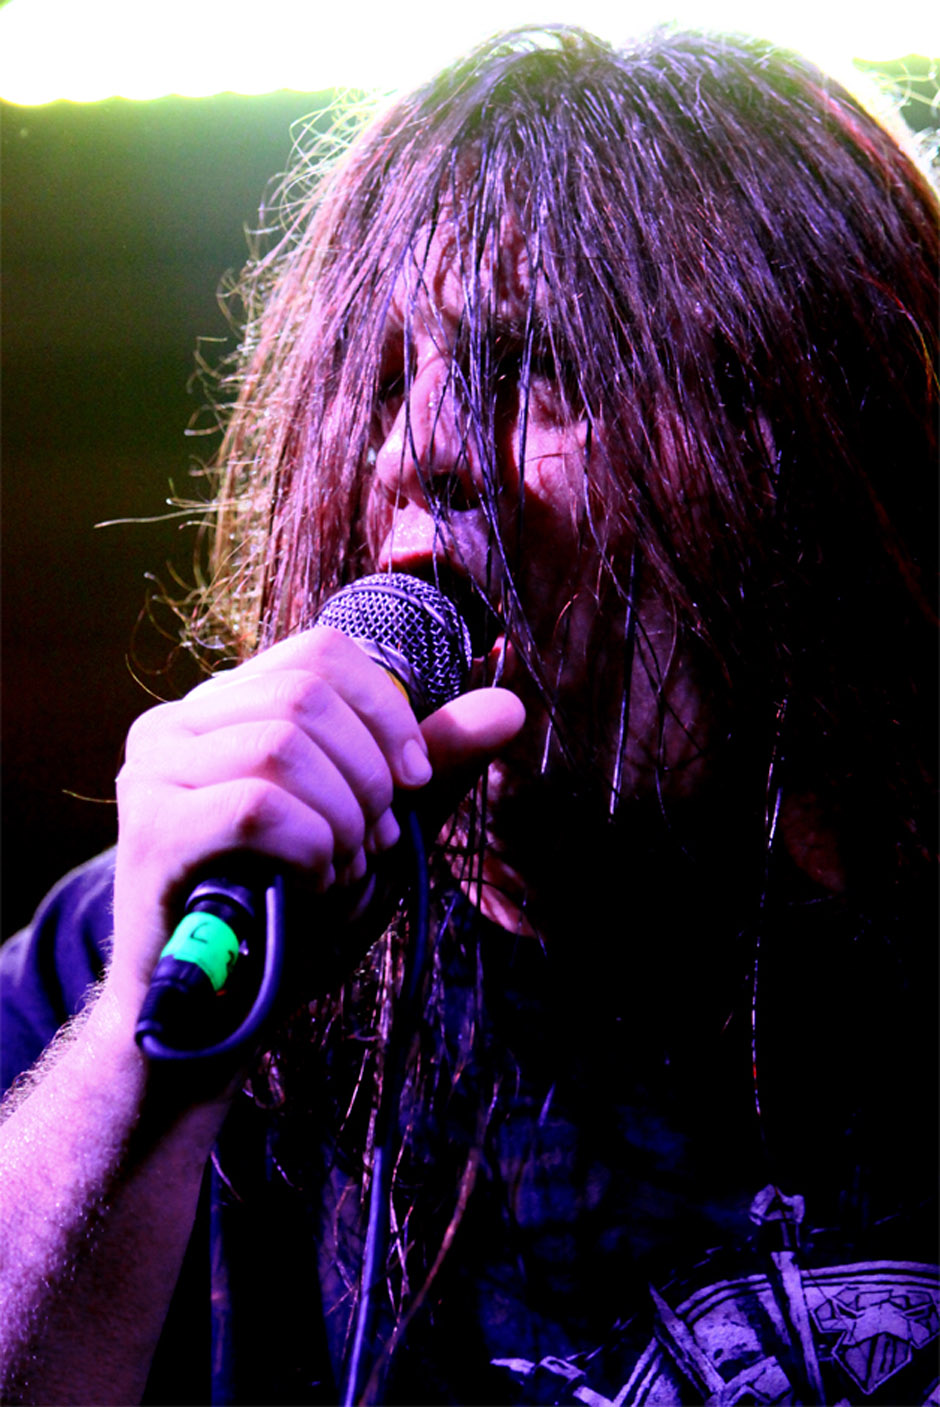 Cannibal Corpse live, 22.02.2013, Geiselwind, Music Hall